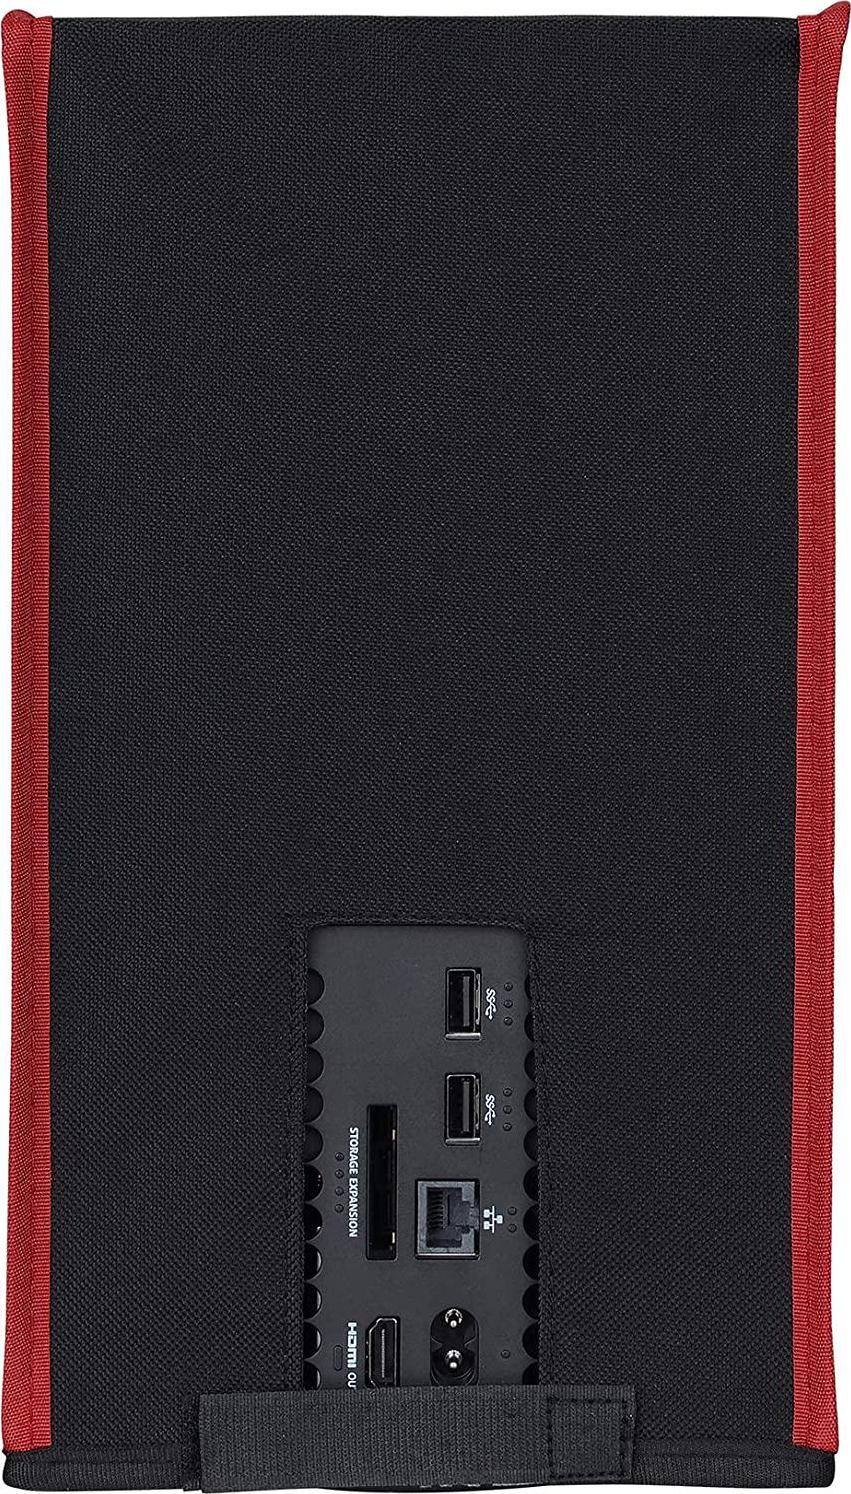 playvital, PlayVital Black Nylon Dust Cover for Xbox Series X Console, Soft Neat Lining Dust Guard, Anti Scratch Waterproof Cover Sleeve for Xbox Series X Console - Red Trim